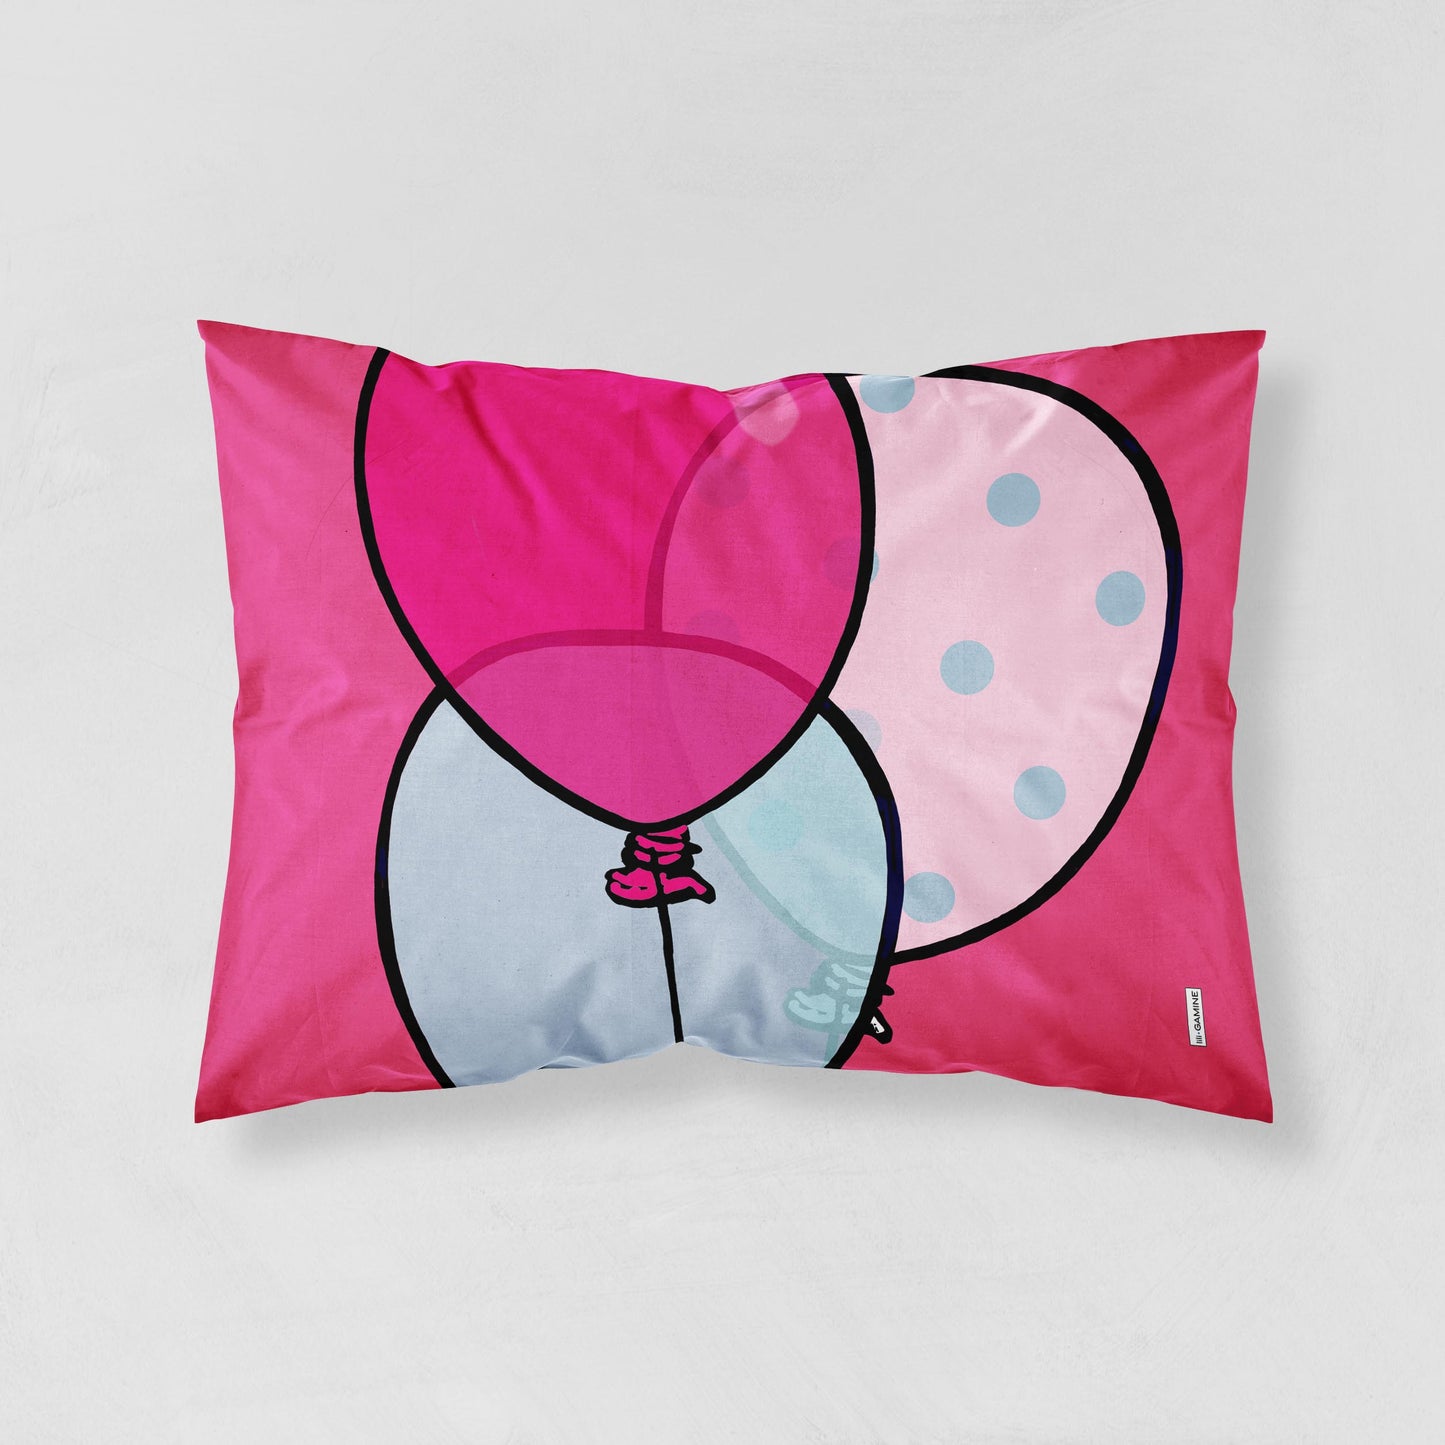  Pink Balloon Pillow Cover by Lili Gamine